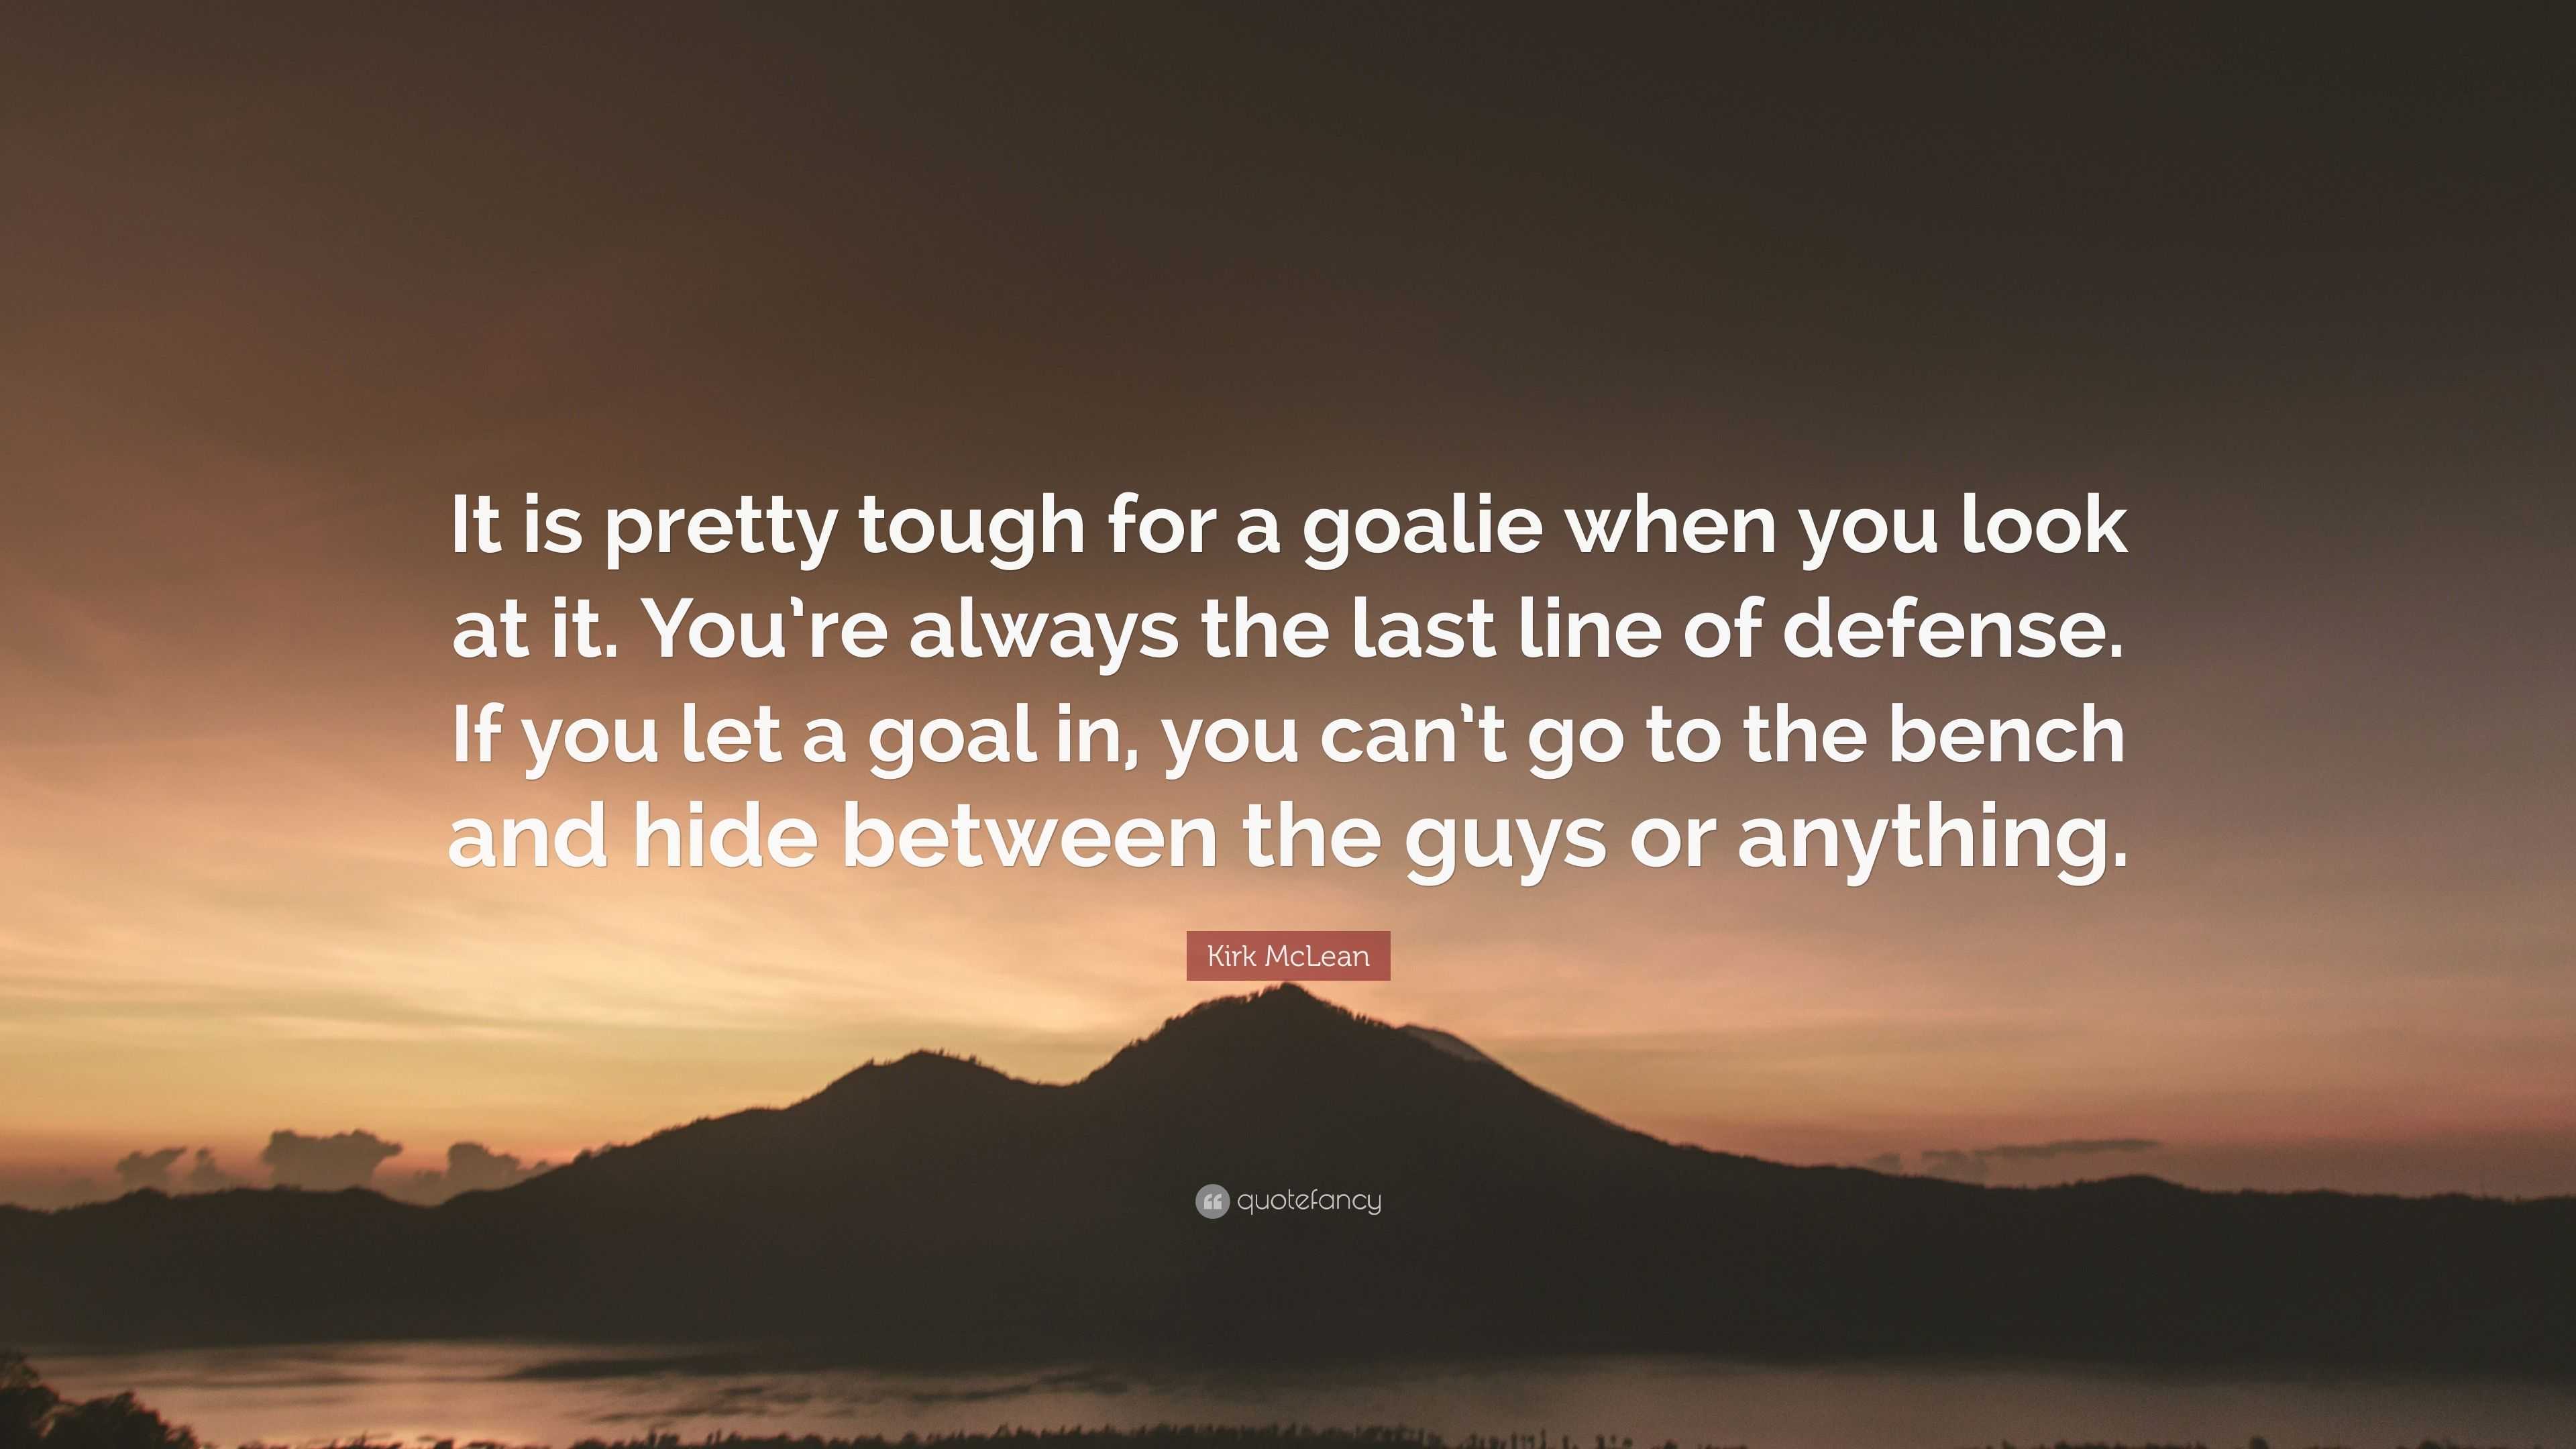 Kirk McLean Quote: “It is pretty tough for a goalie when you look at it.  You're always the last line of defense. If you let a goal in, you c”